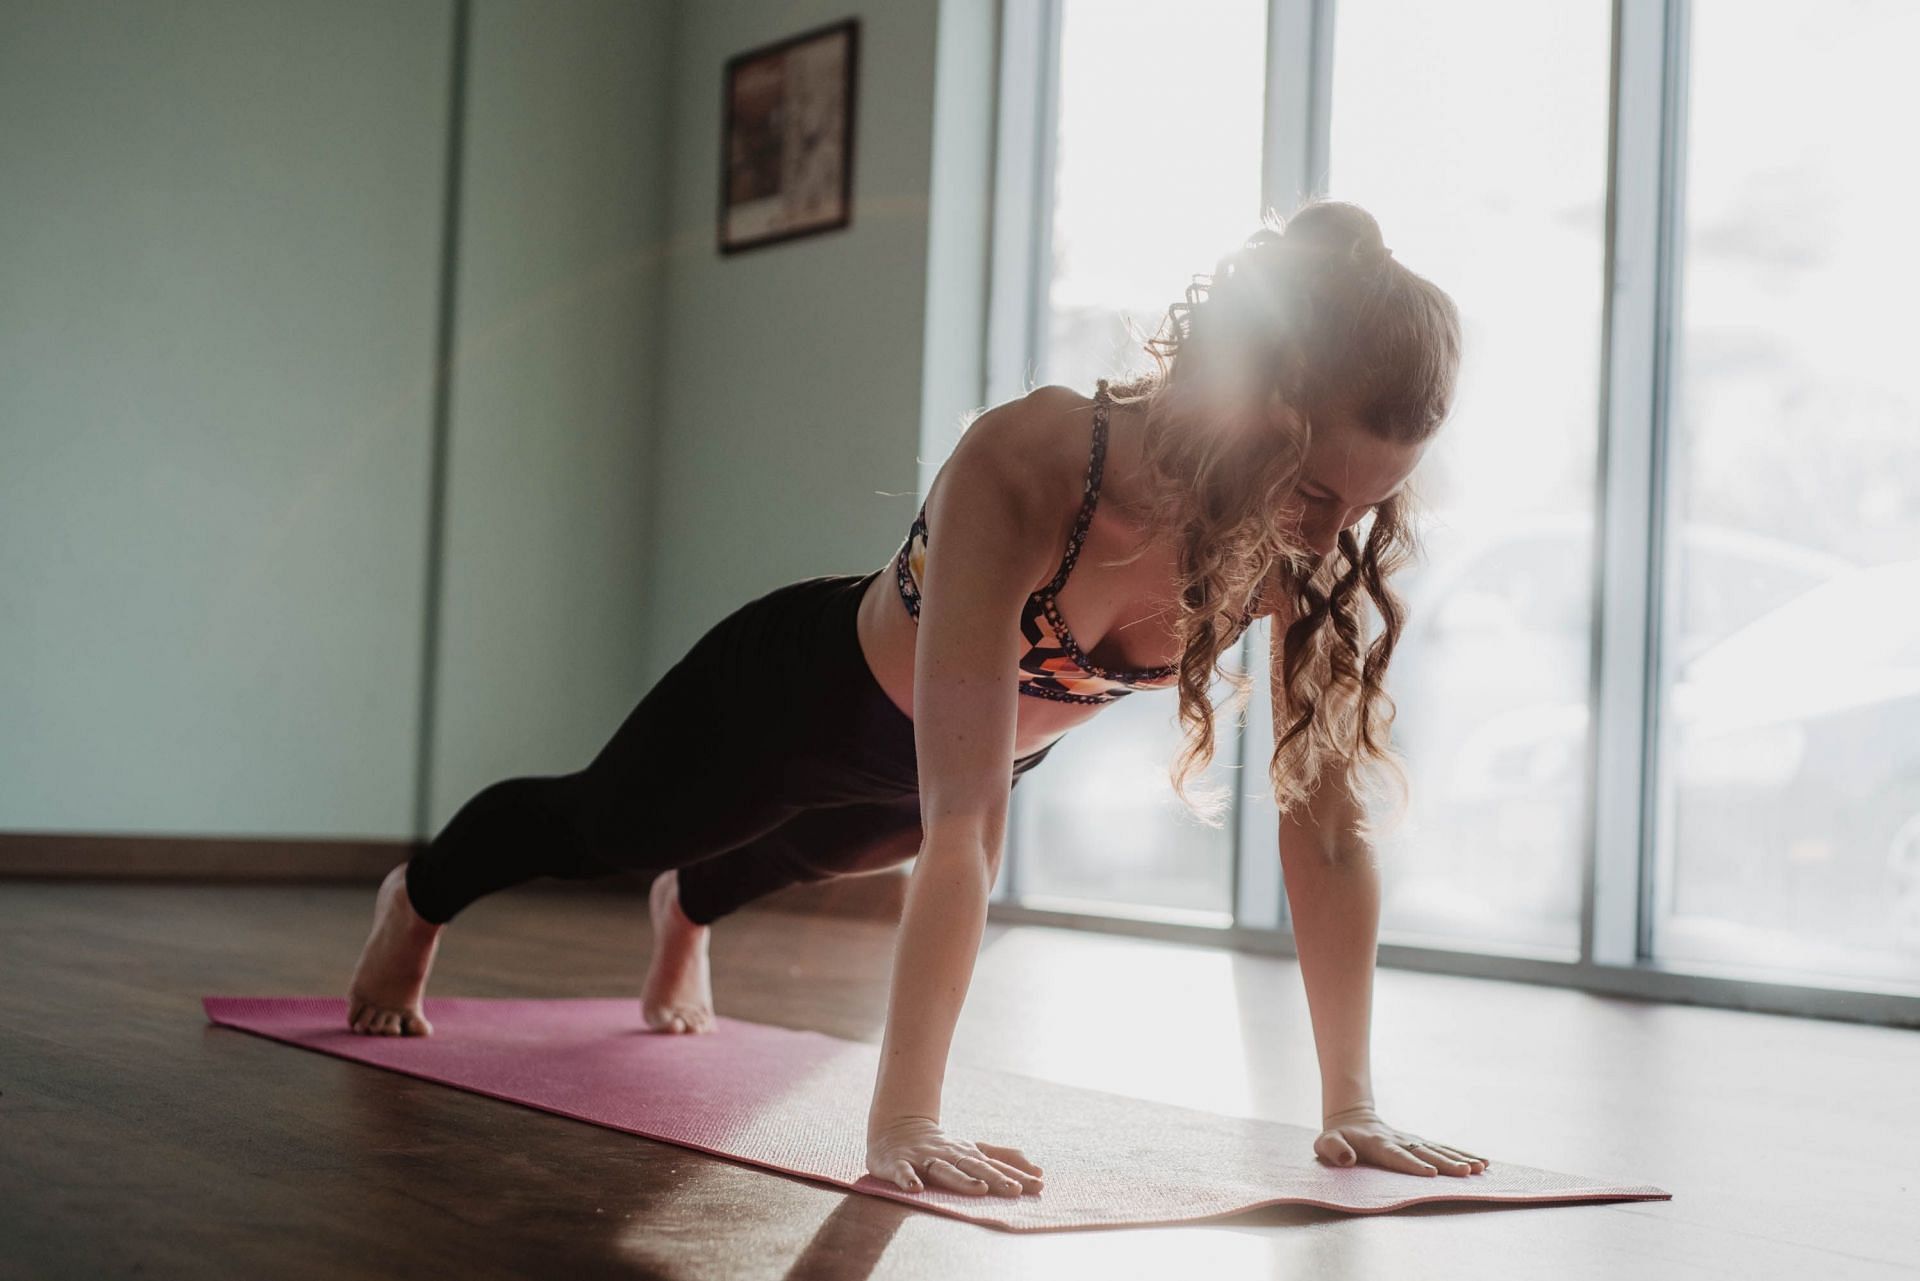 Too lazy to hit the gym? Try these 5 indoor workouts to get ripped from the comfort of your home! (Image via unsplash/Olivia Bauso)